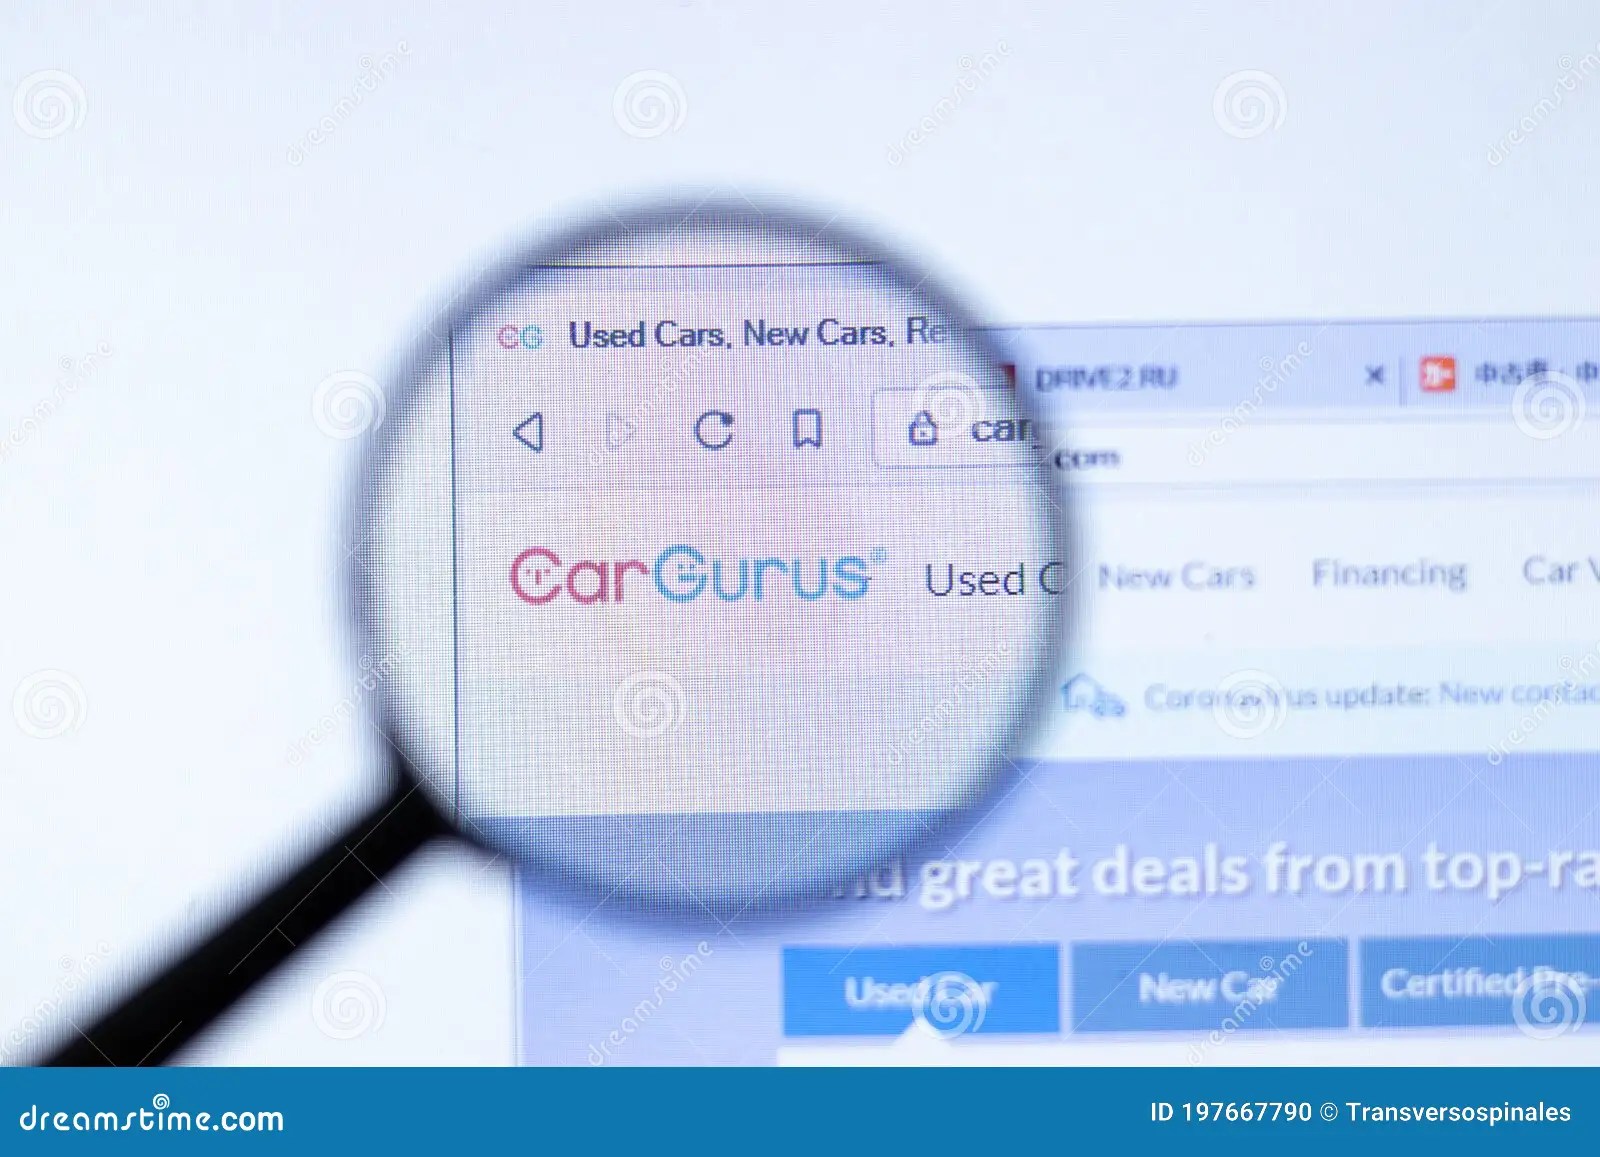 Search new car listings to find the best local deals. Cargurus Photos Free Royalty Free Stock Photos From Dreamstime